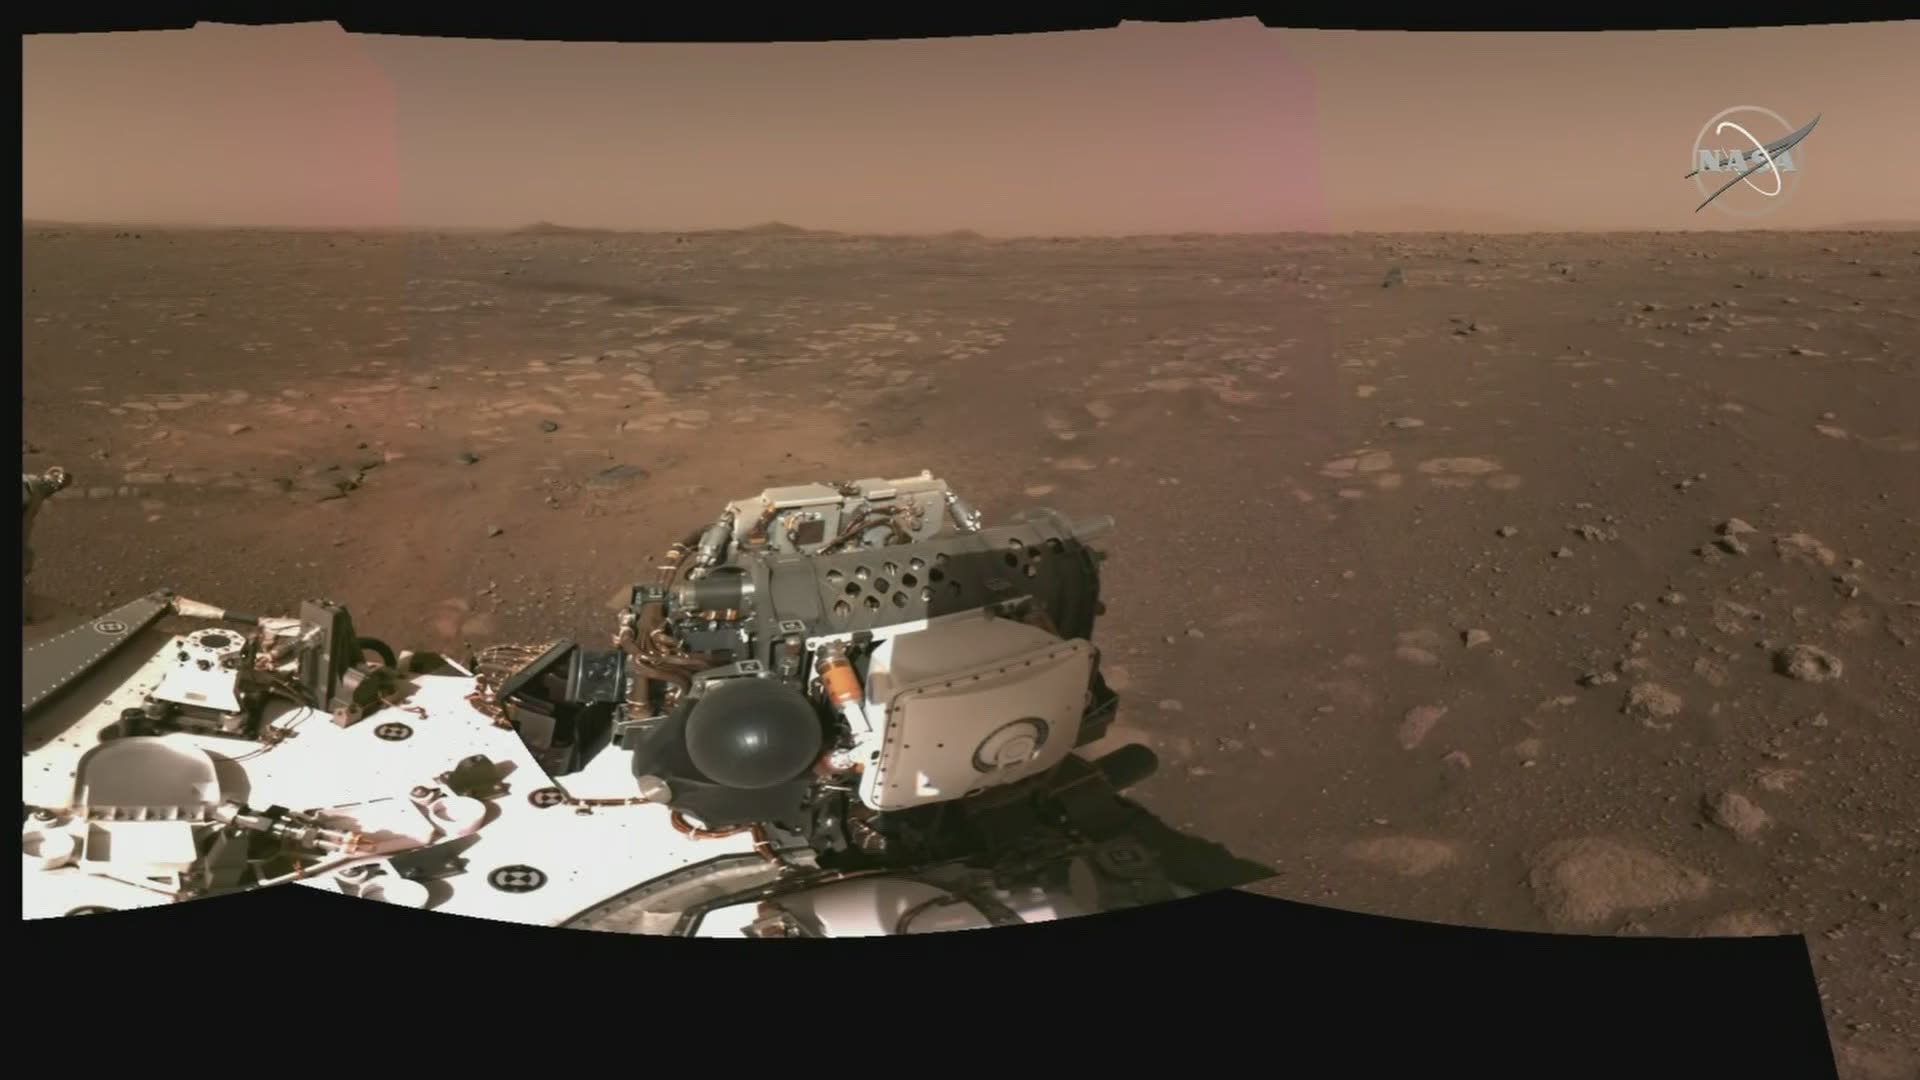 NASA on Monday shared new photos that have been sent back of the surface of Mars from the Perseverance rover.